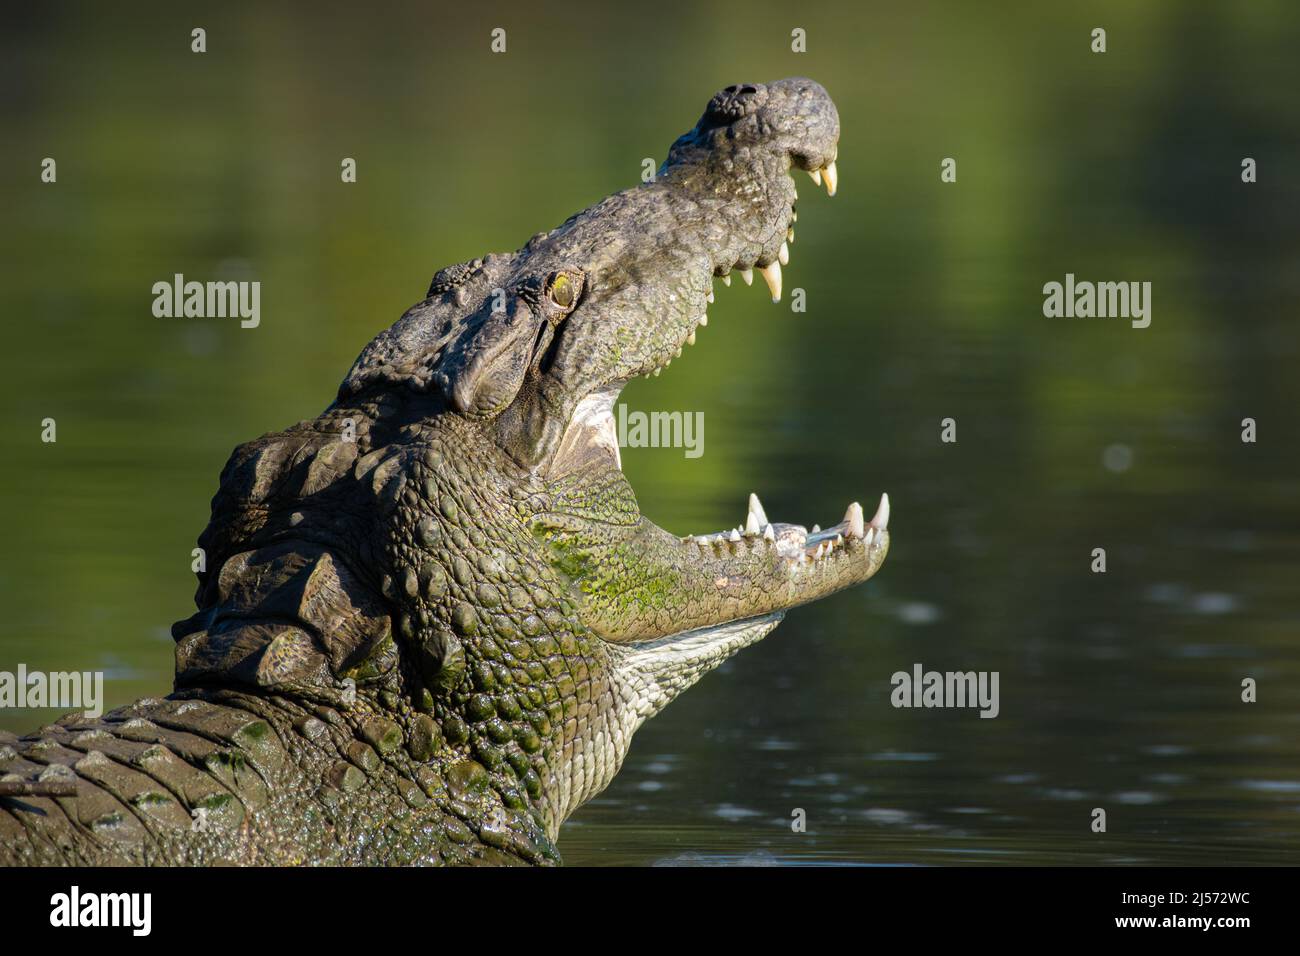 OPEN JAWS OF A CROCODILE IN INDIAN RIVER Stock Photo